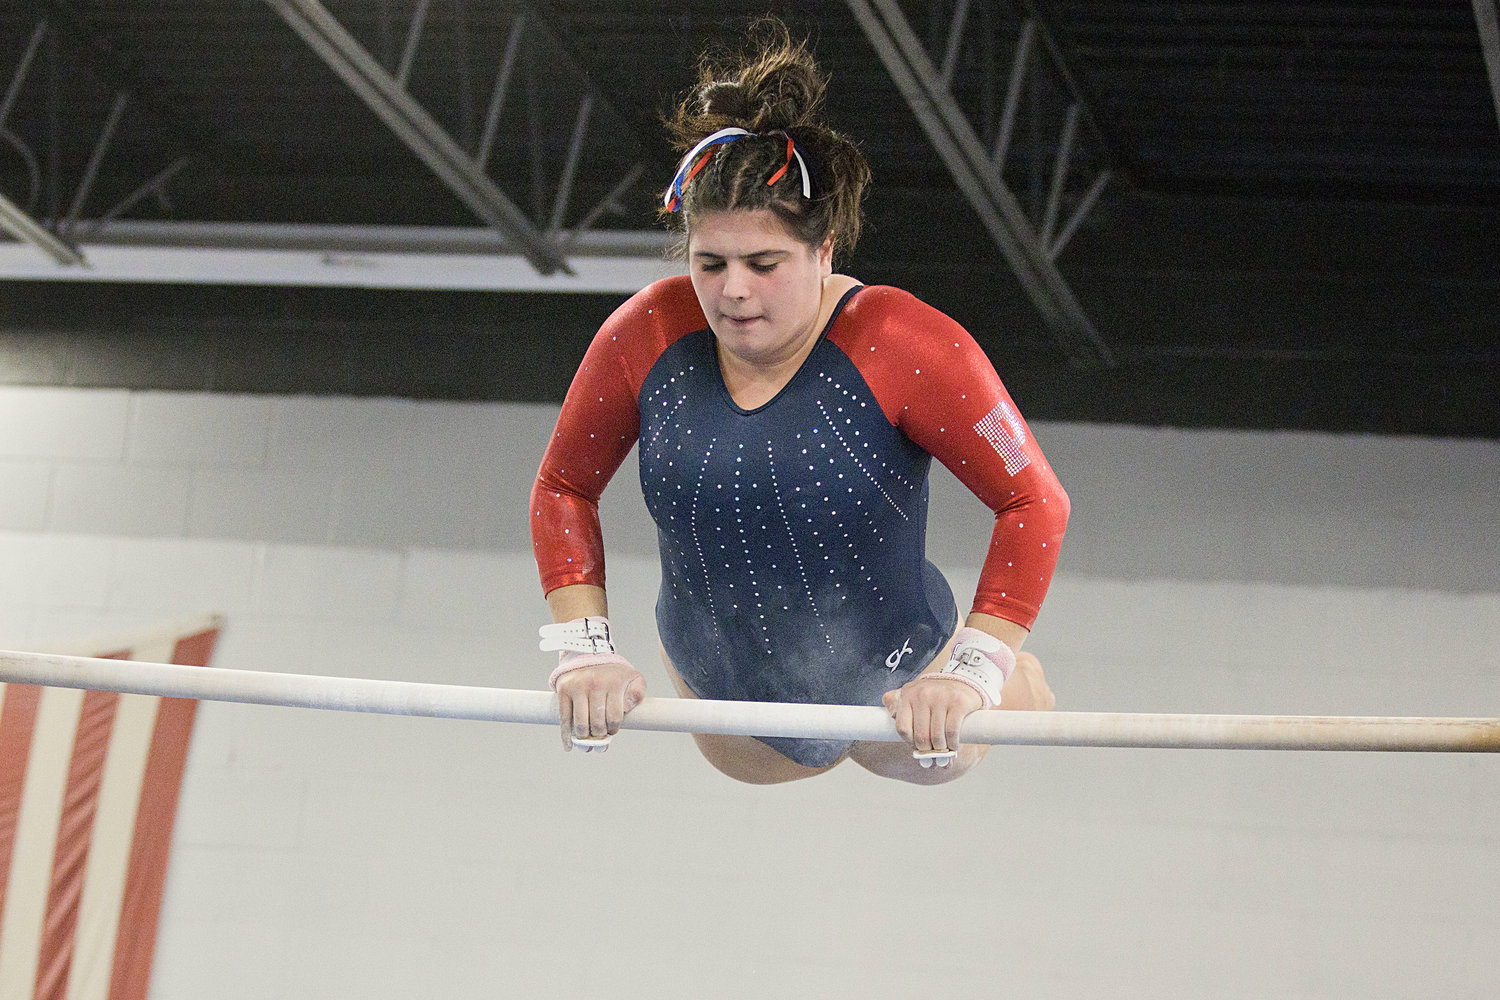 Kayla Oliveira lifts herself above the high bar while performing her routine on the uneven bars. She earned a 7.6 on the event.